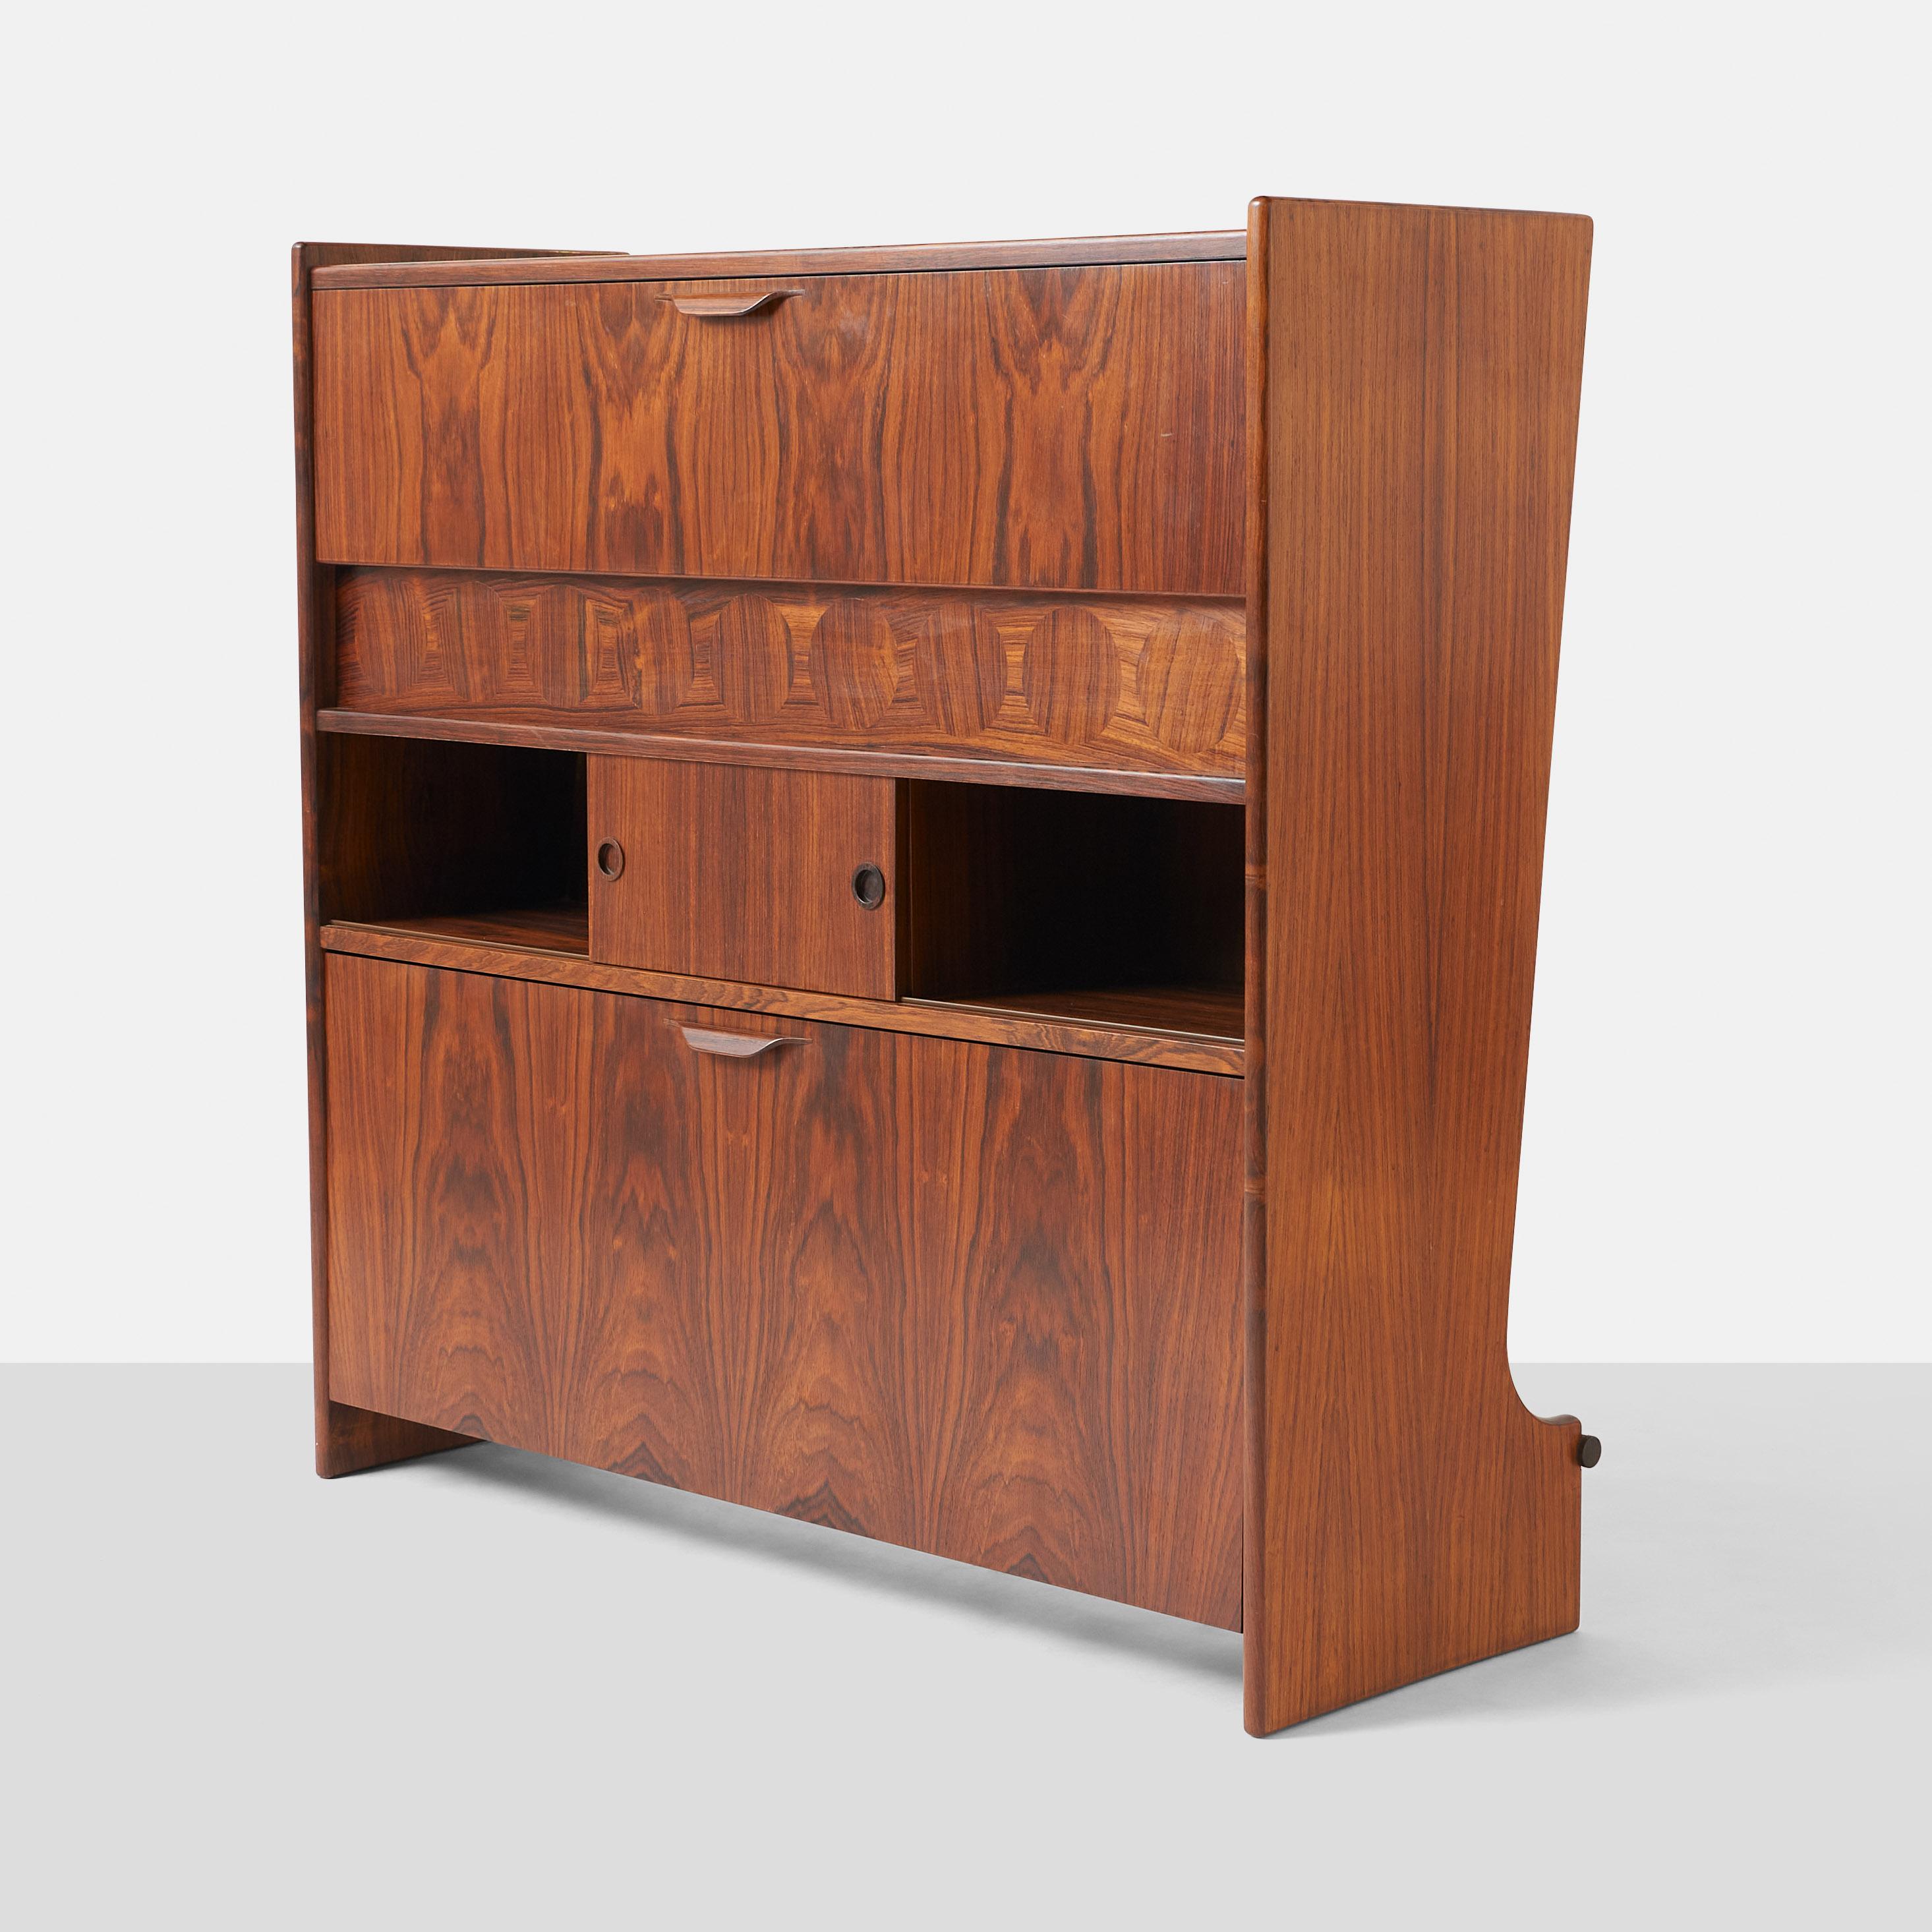 Beautiful freestanding rosewood bar, model #SK661 by Johnnes Andersen for J. Skaaning & Søn. Fold-down front door reveals a hidden bar with glass shelves and room to store glasses and bottles.